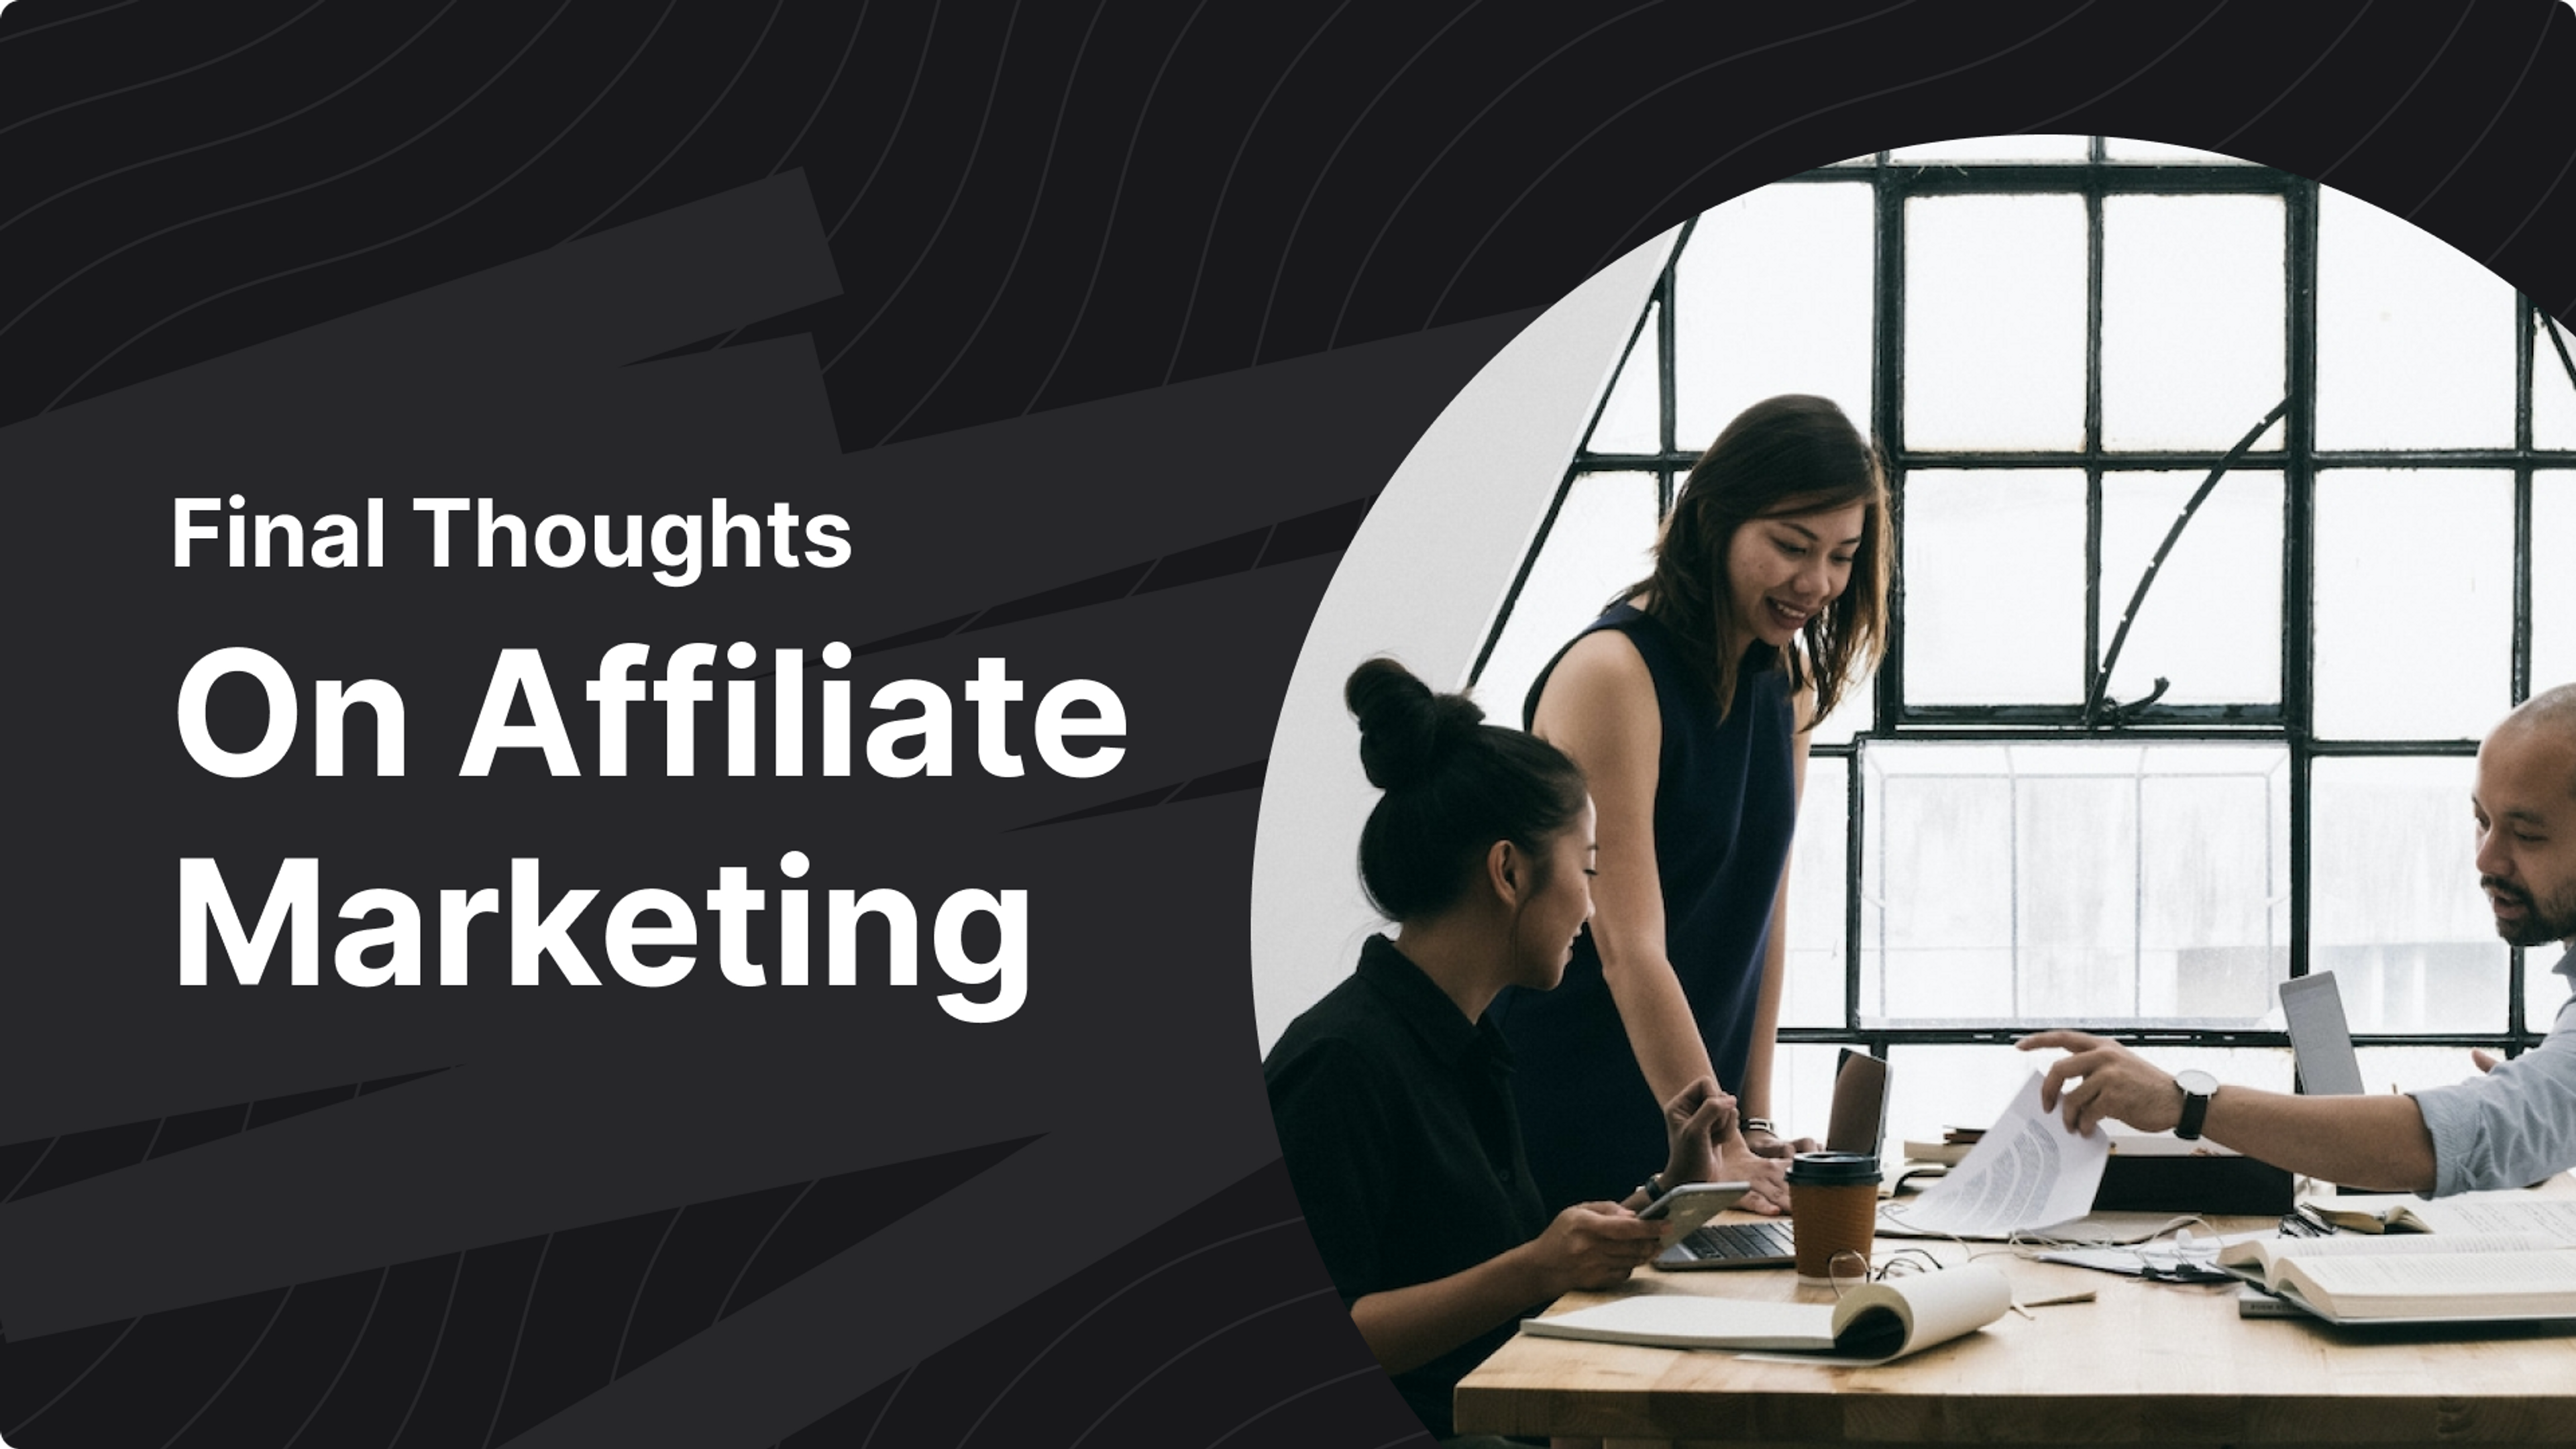 Final Thoughts On Affiliate Marketing